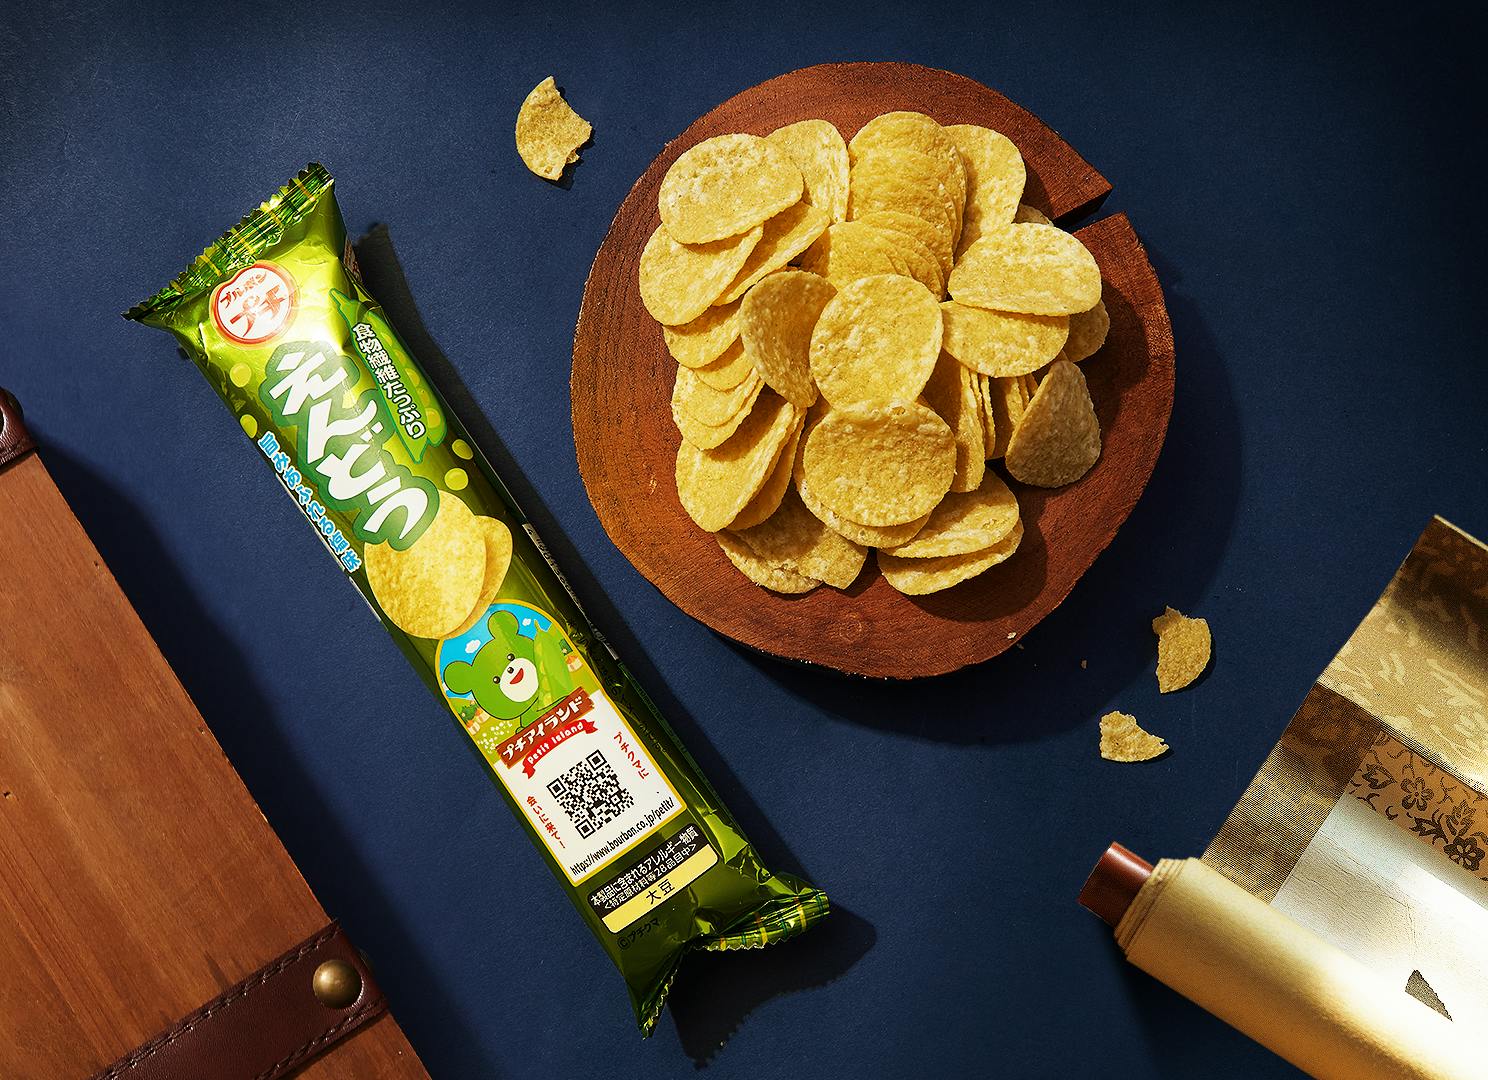 Endou Pea Chips sits against a blue backdrop, surrounded by ninja-inspired decor.